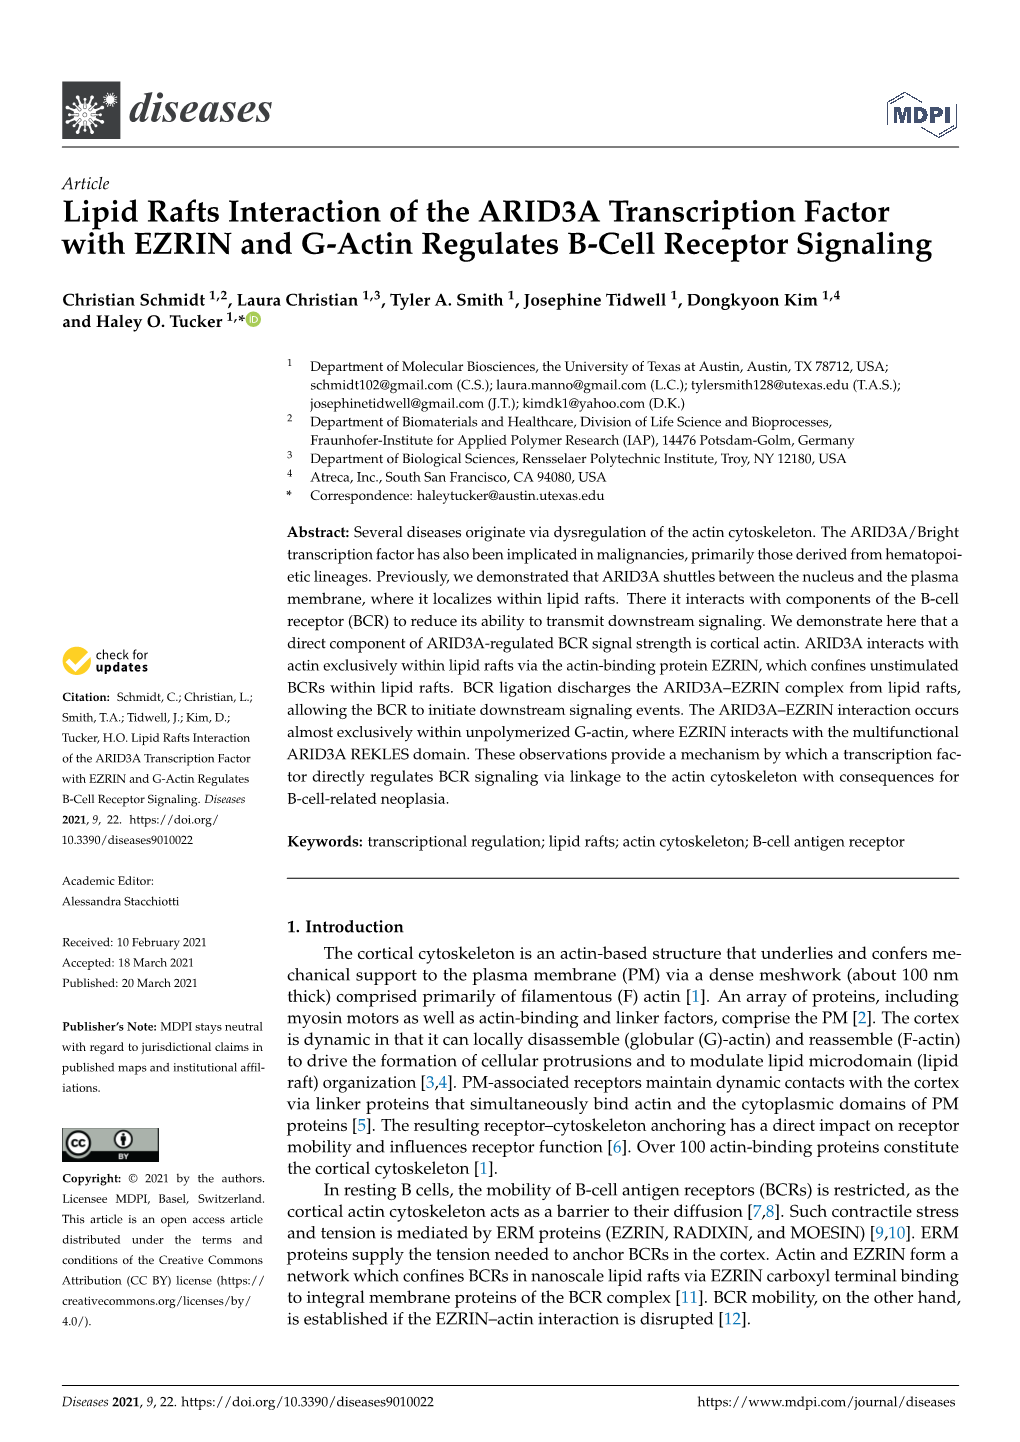 Lipid Rafts Interaction of the ARID3A Transcription Factor with EZRIN and G-Actin Regulates B-Cell Receptor Signaling